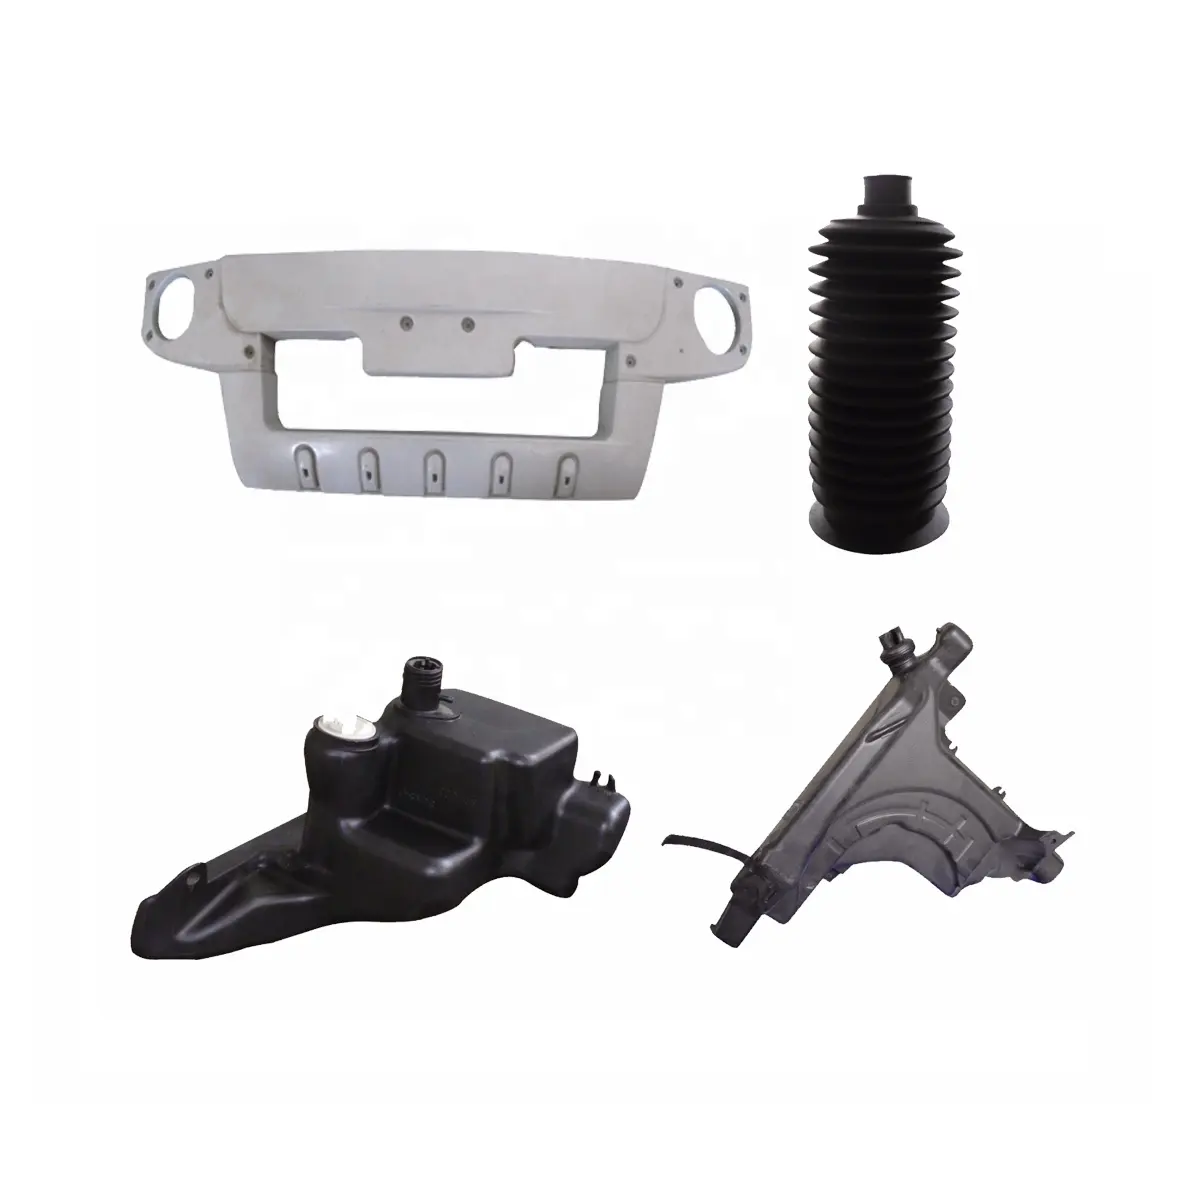 Car Water Tank Mold Blow Mould For Auto Parts Plastic Air Duct, Spoiler mold Tank Bumper mould